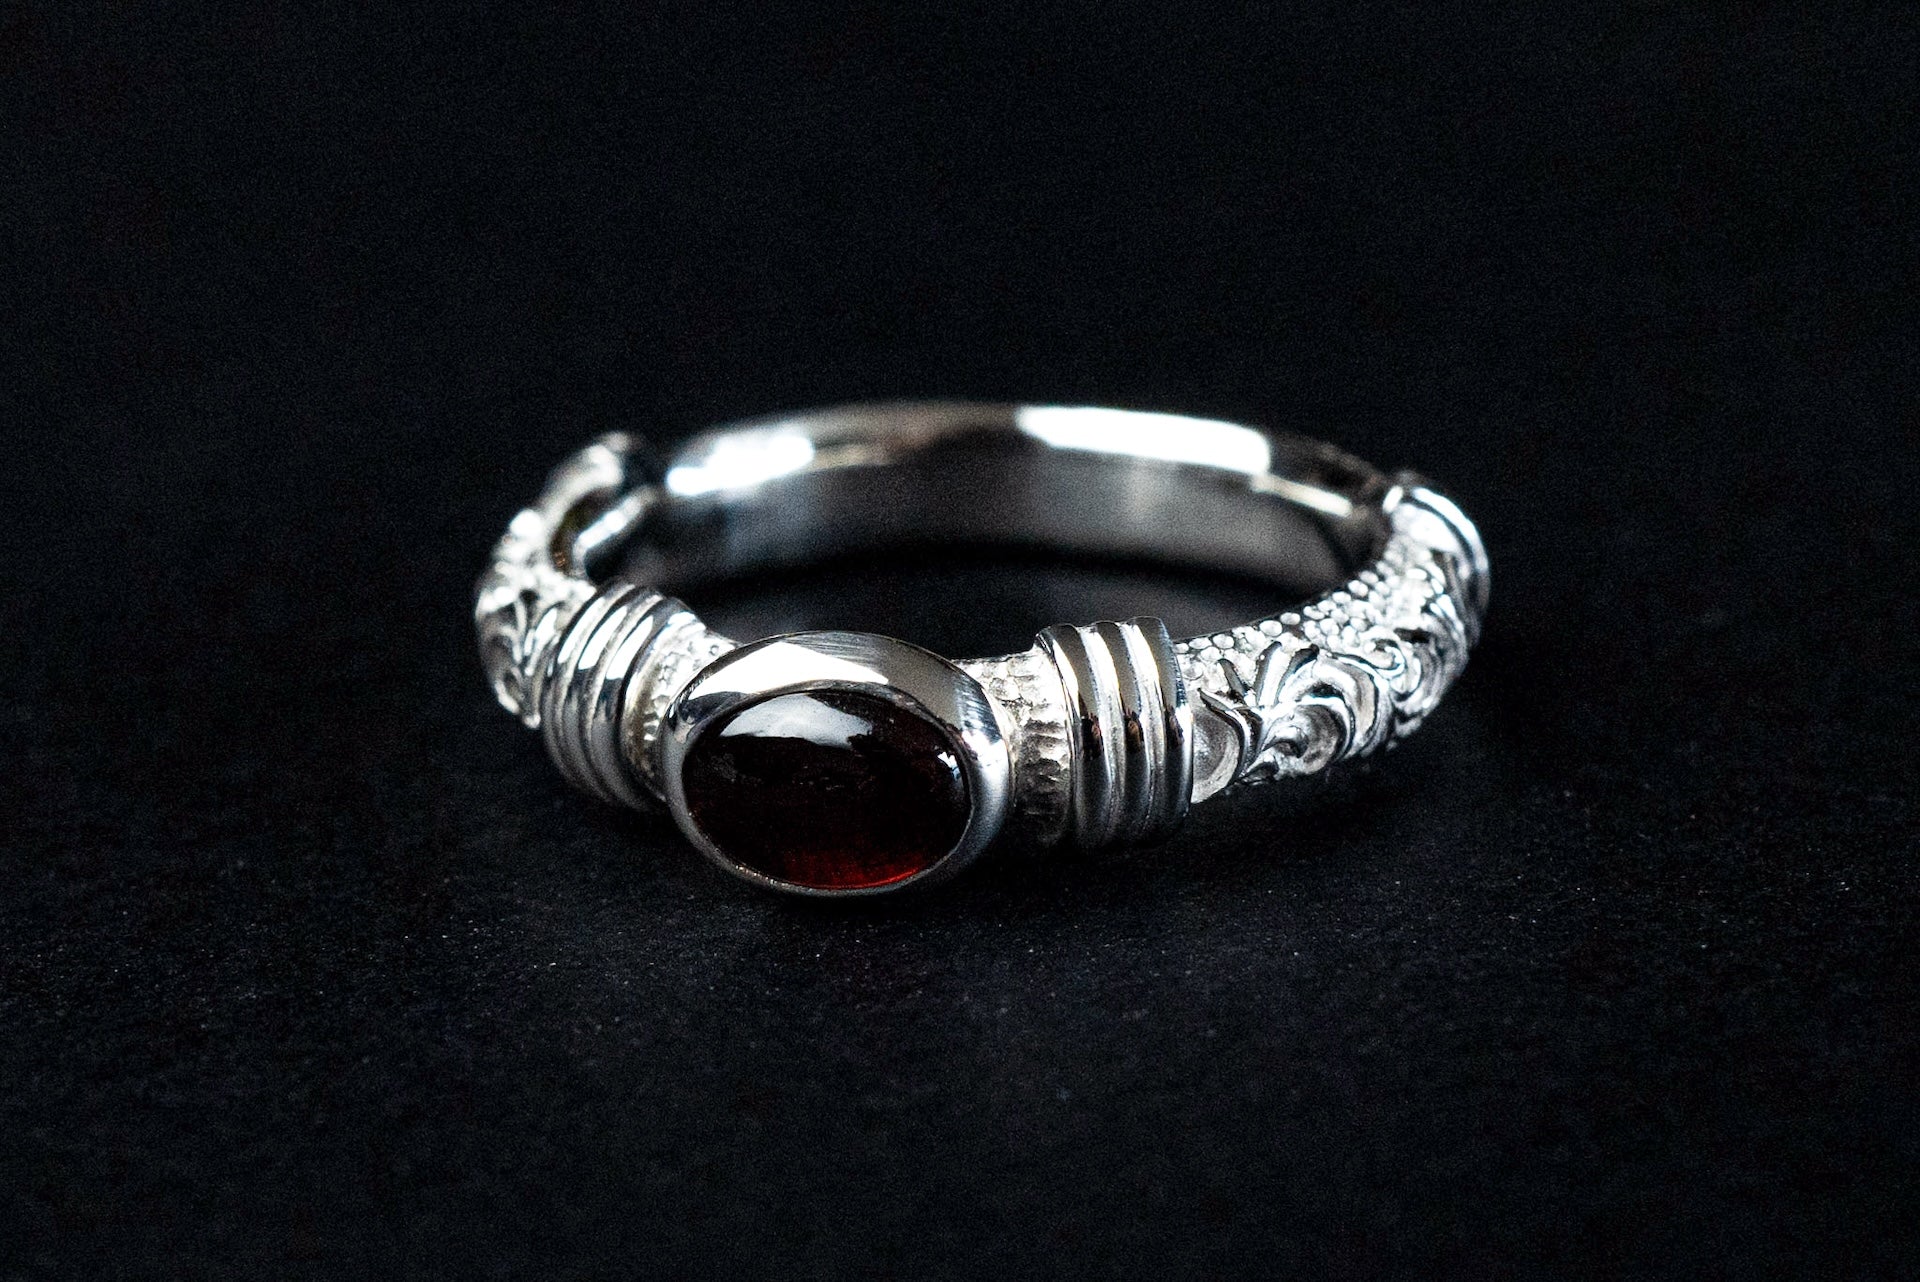 Legend Size Small "Anti-Ghost" Ring with Garnet